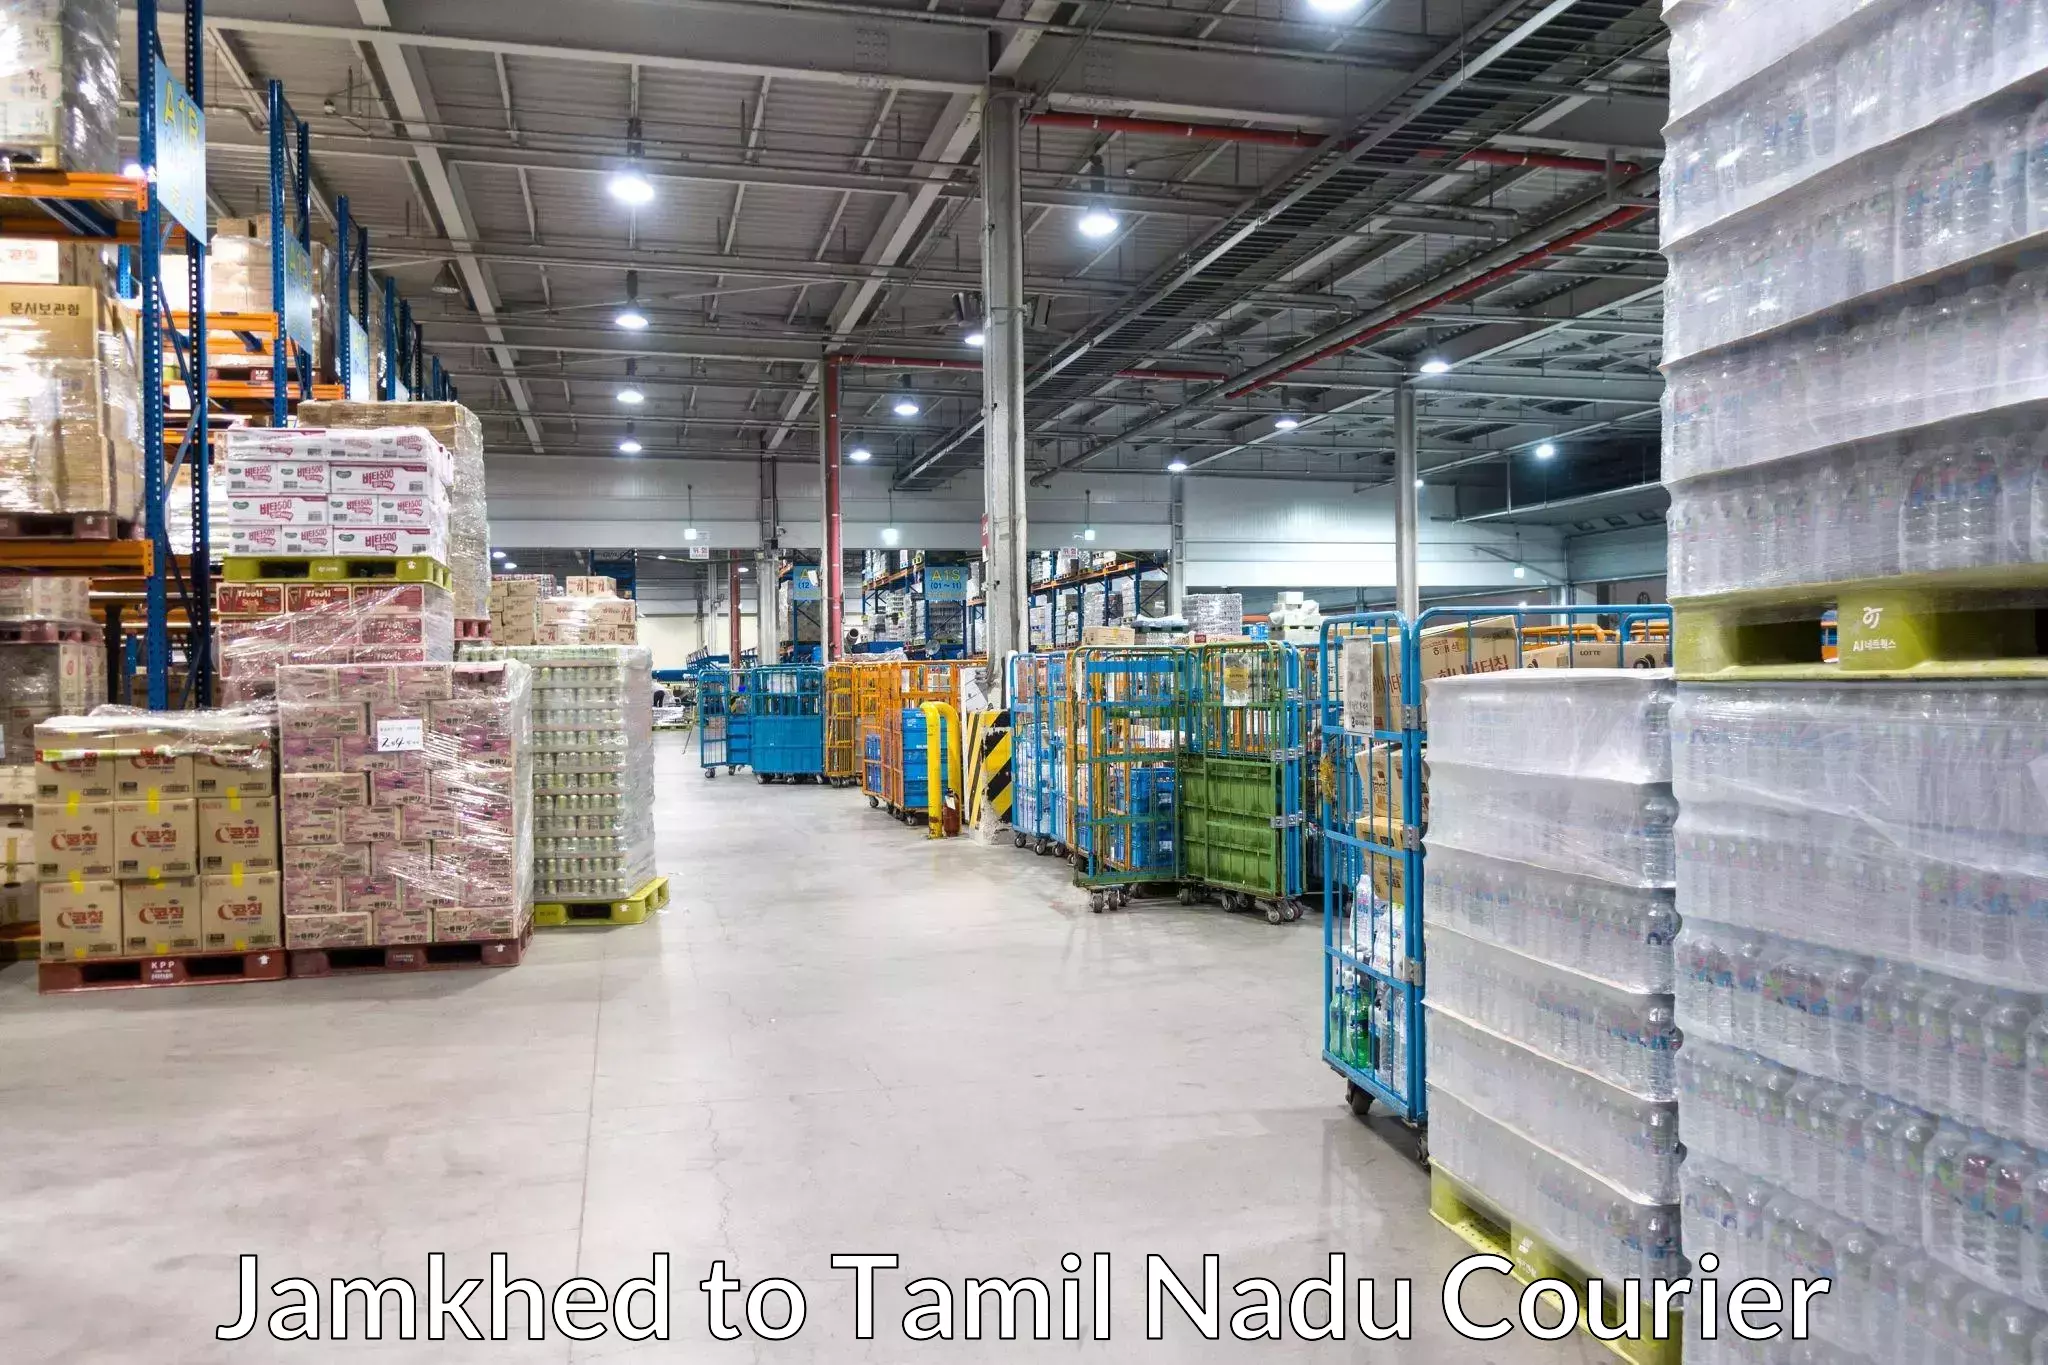 High-capacity courier solutions Jamkhed to Manapparai